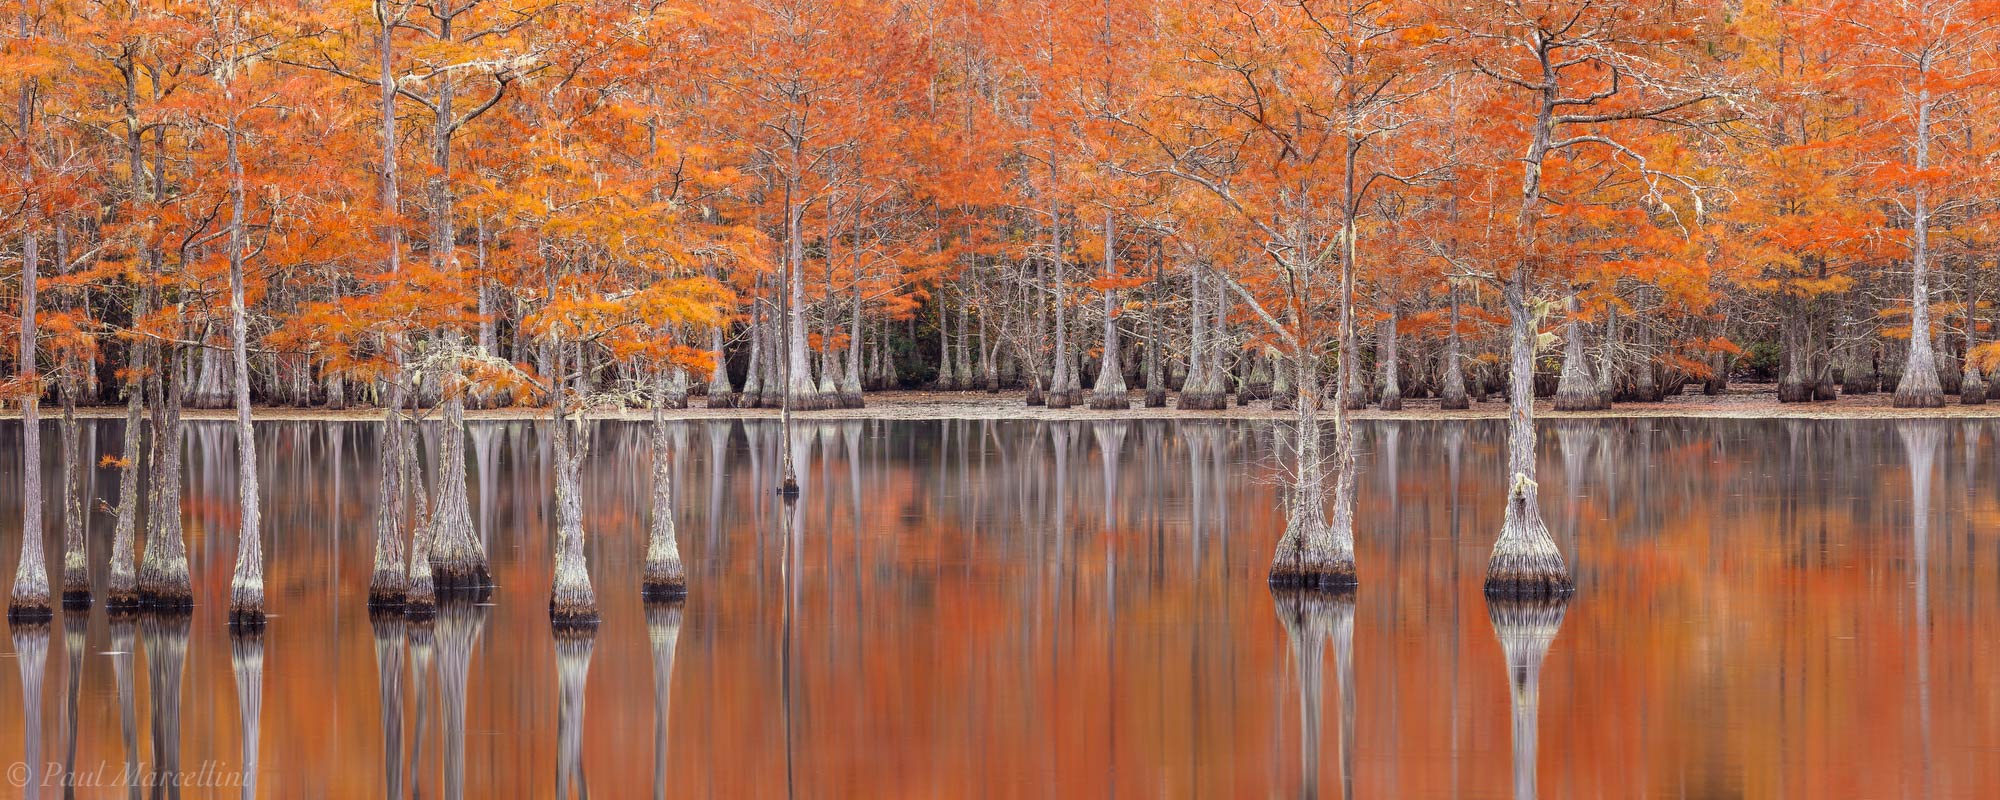 Cypress in reflected pumpkin fall colors.